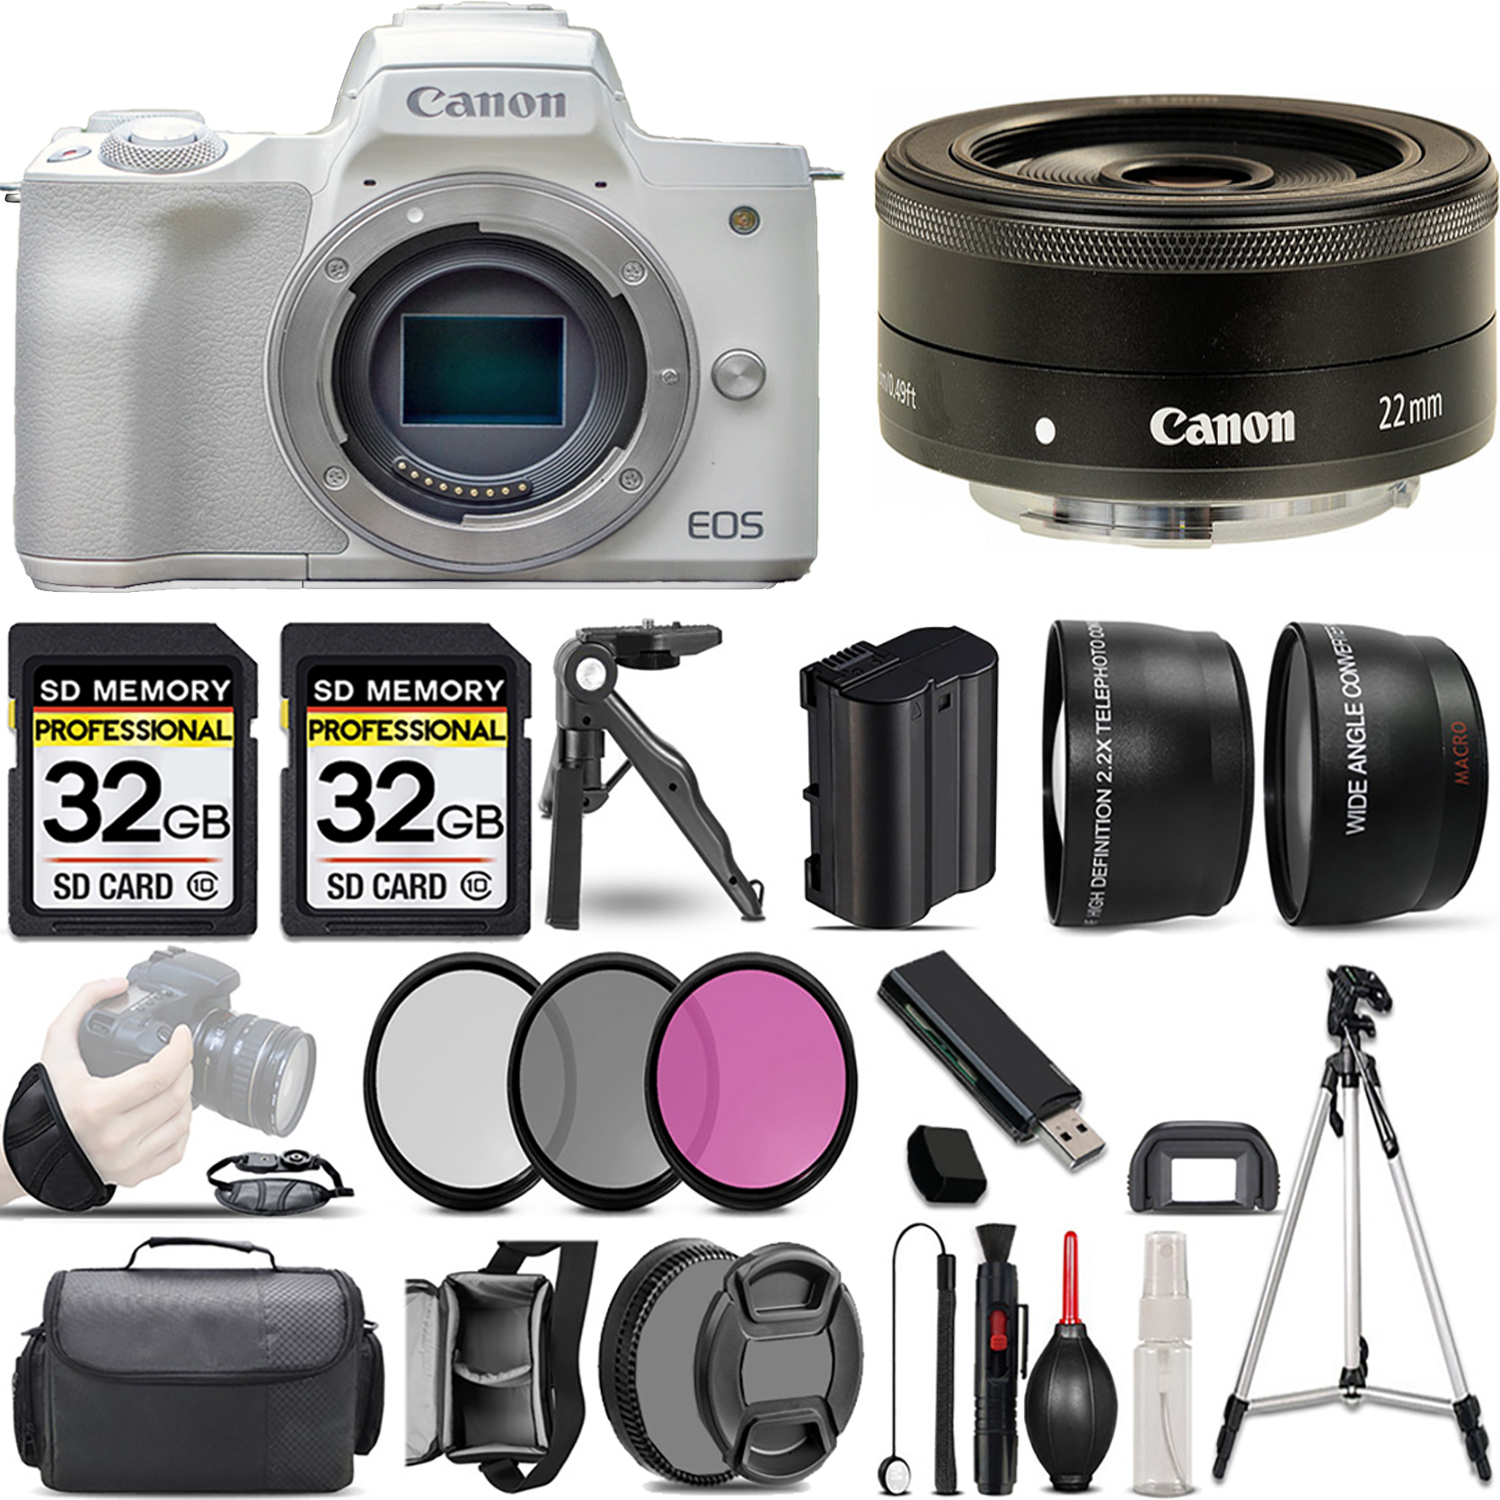 EOS M50 Mark II Camera (White) + 22mm f/2 STM Lens + 3 Piece Filter Set + 64GB *FREE SHIPPING*